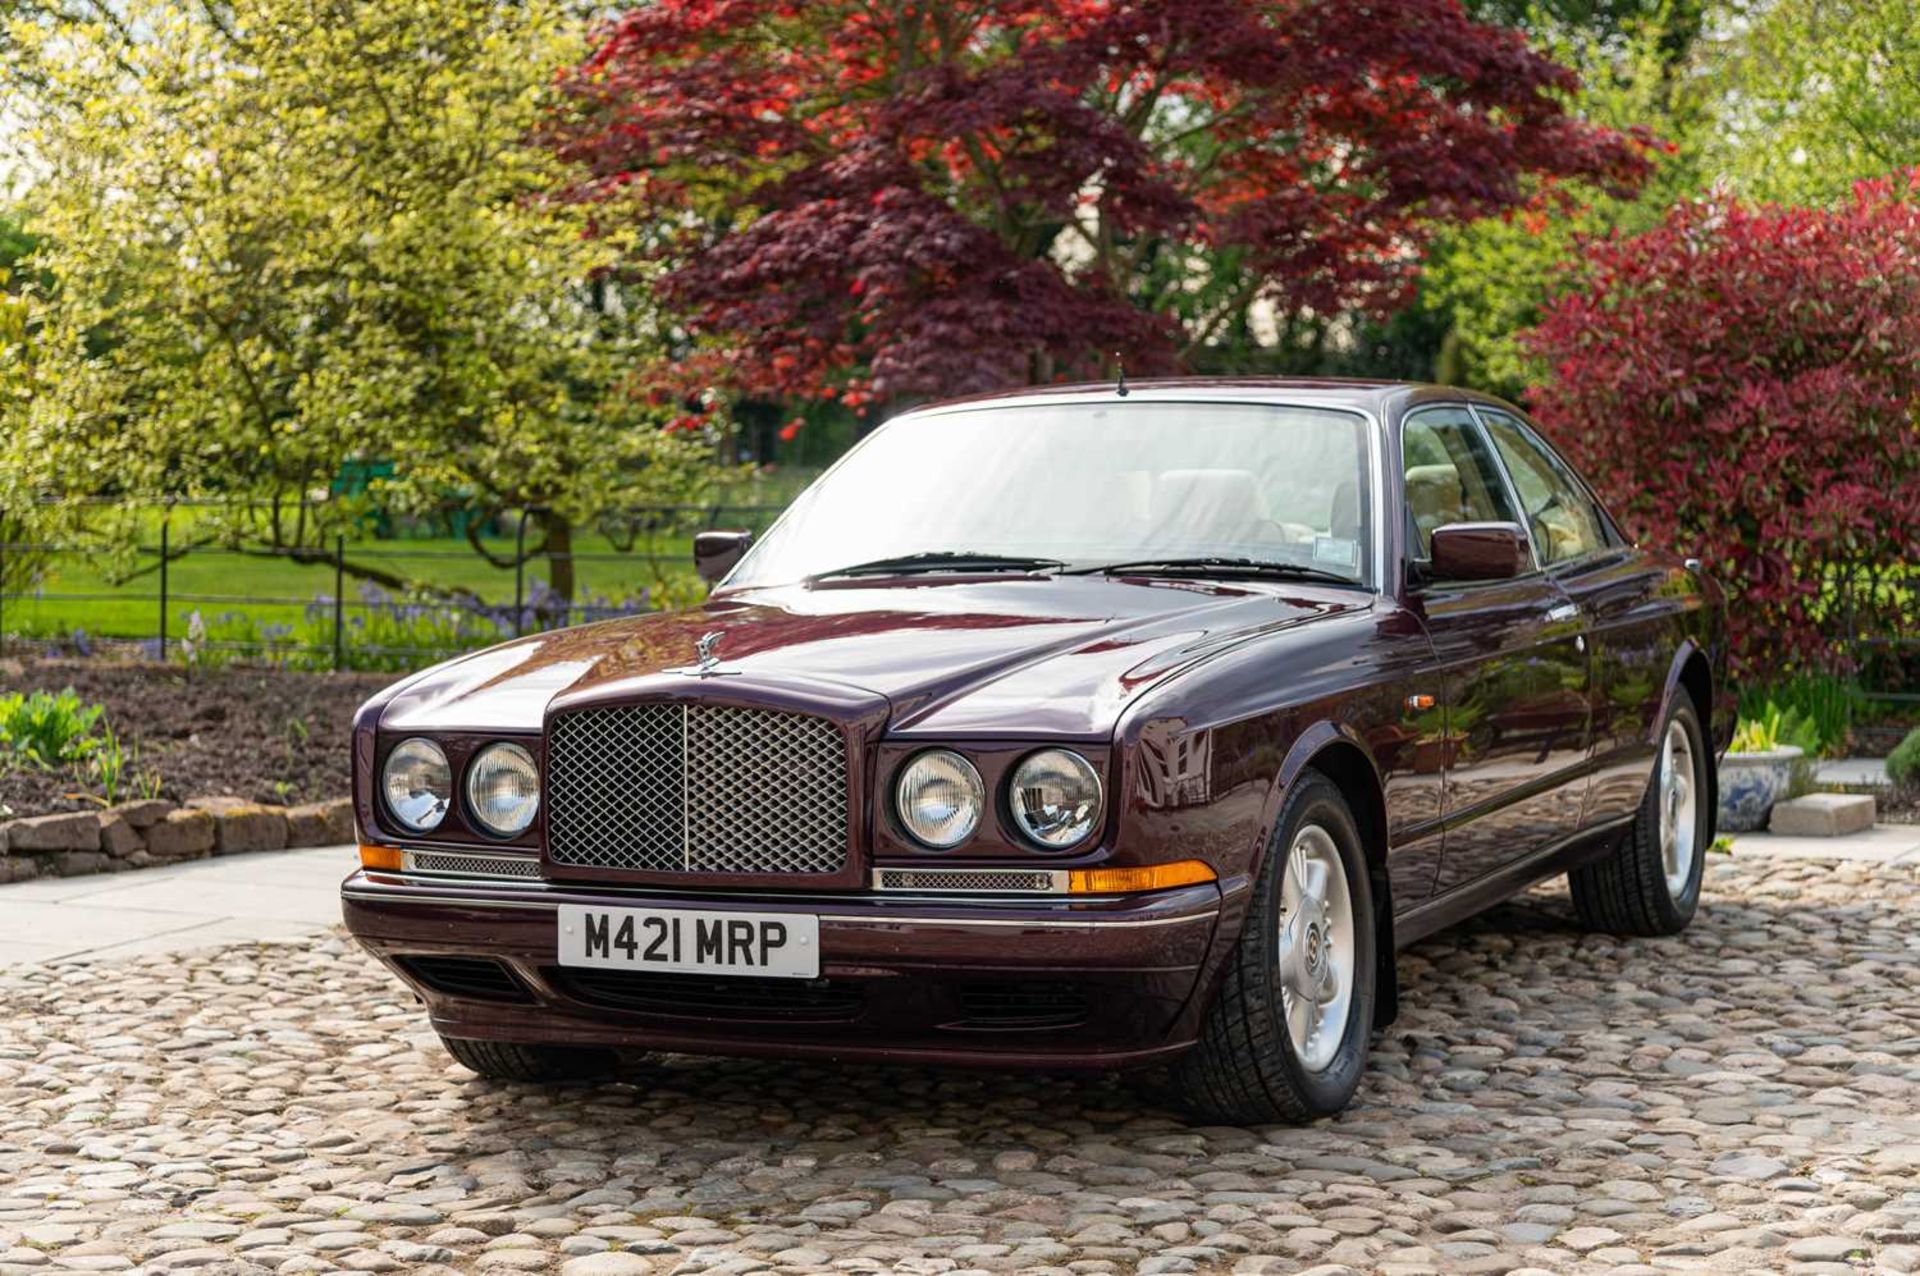 1995 Bentley Continental R Former Bentley demonstrator and subsequently owned by business tycoon Sir - Image 7 of 80